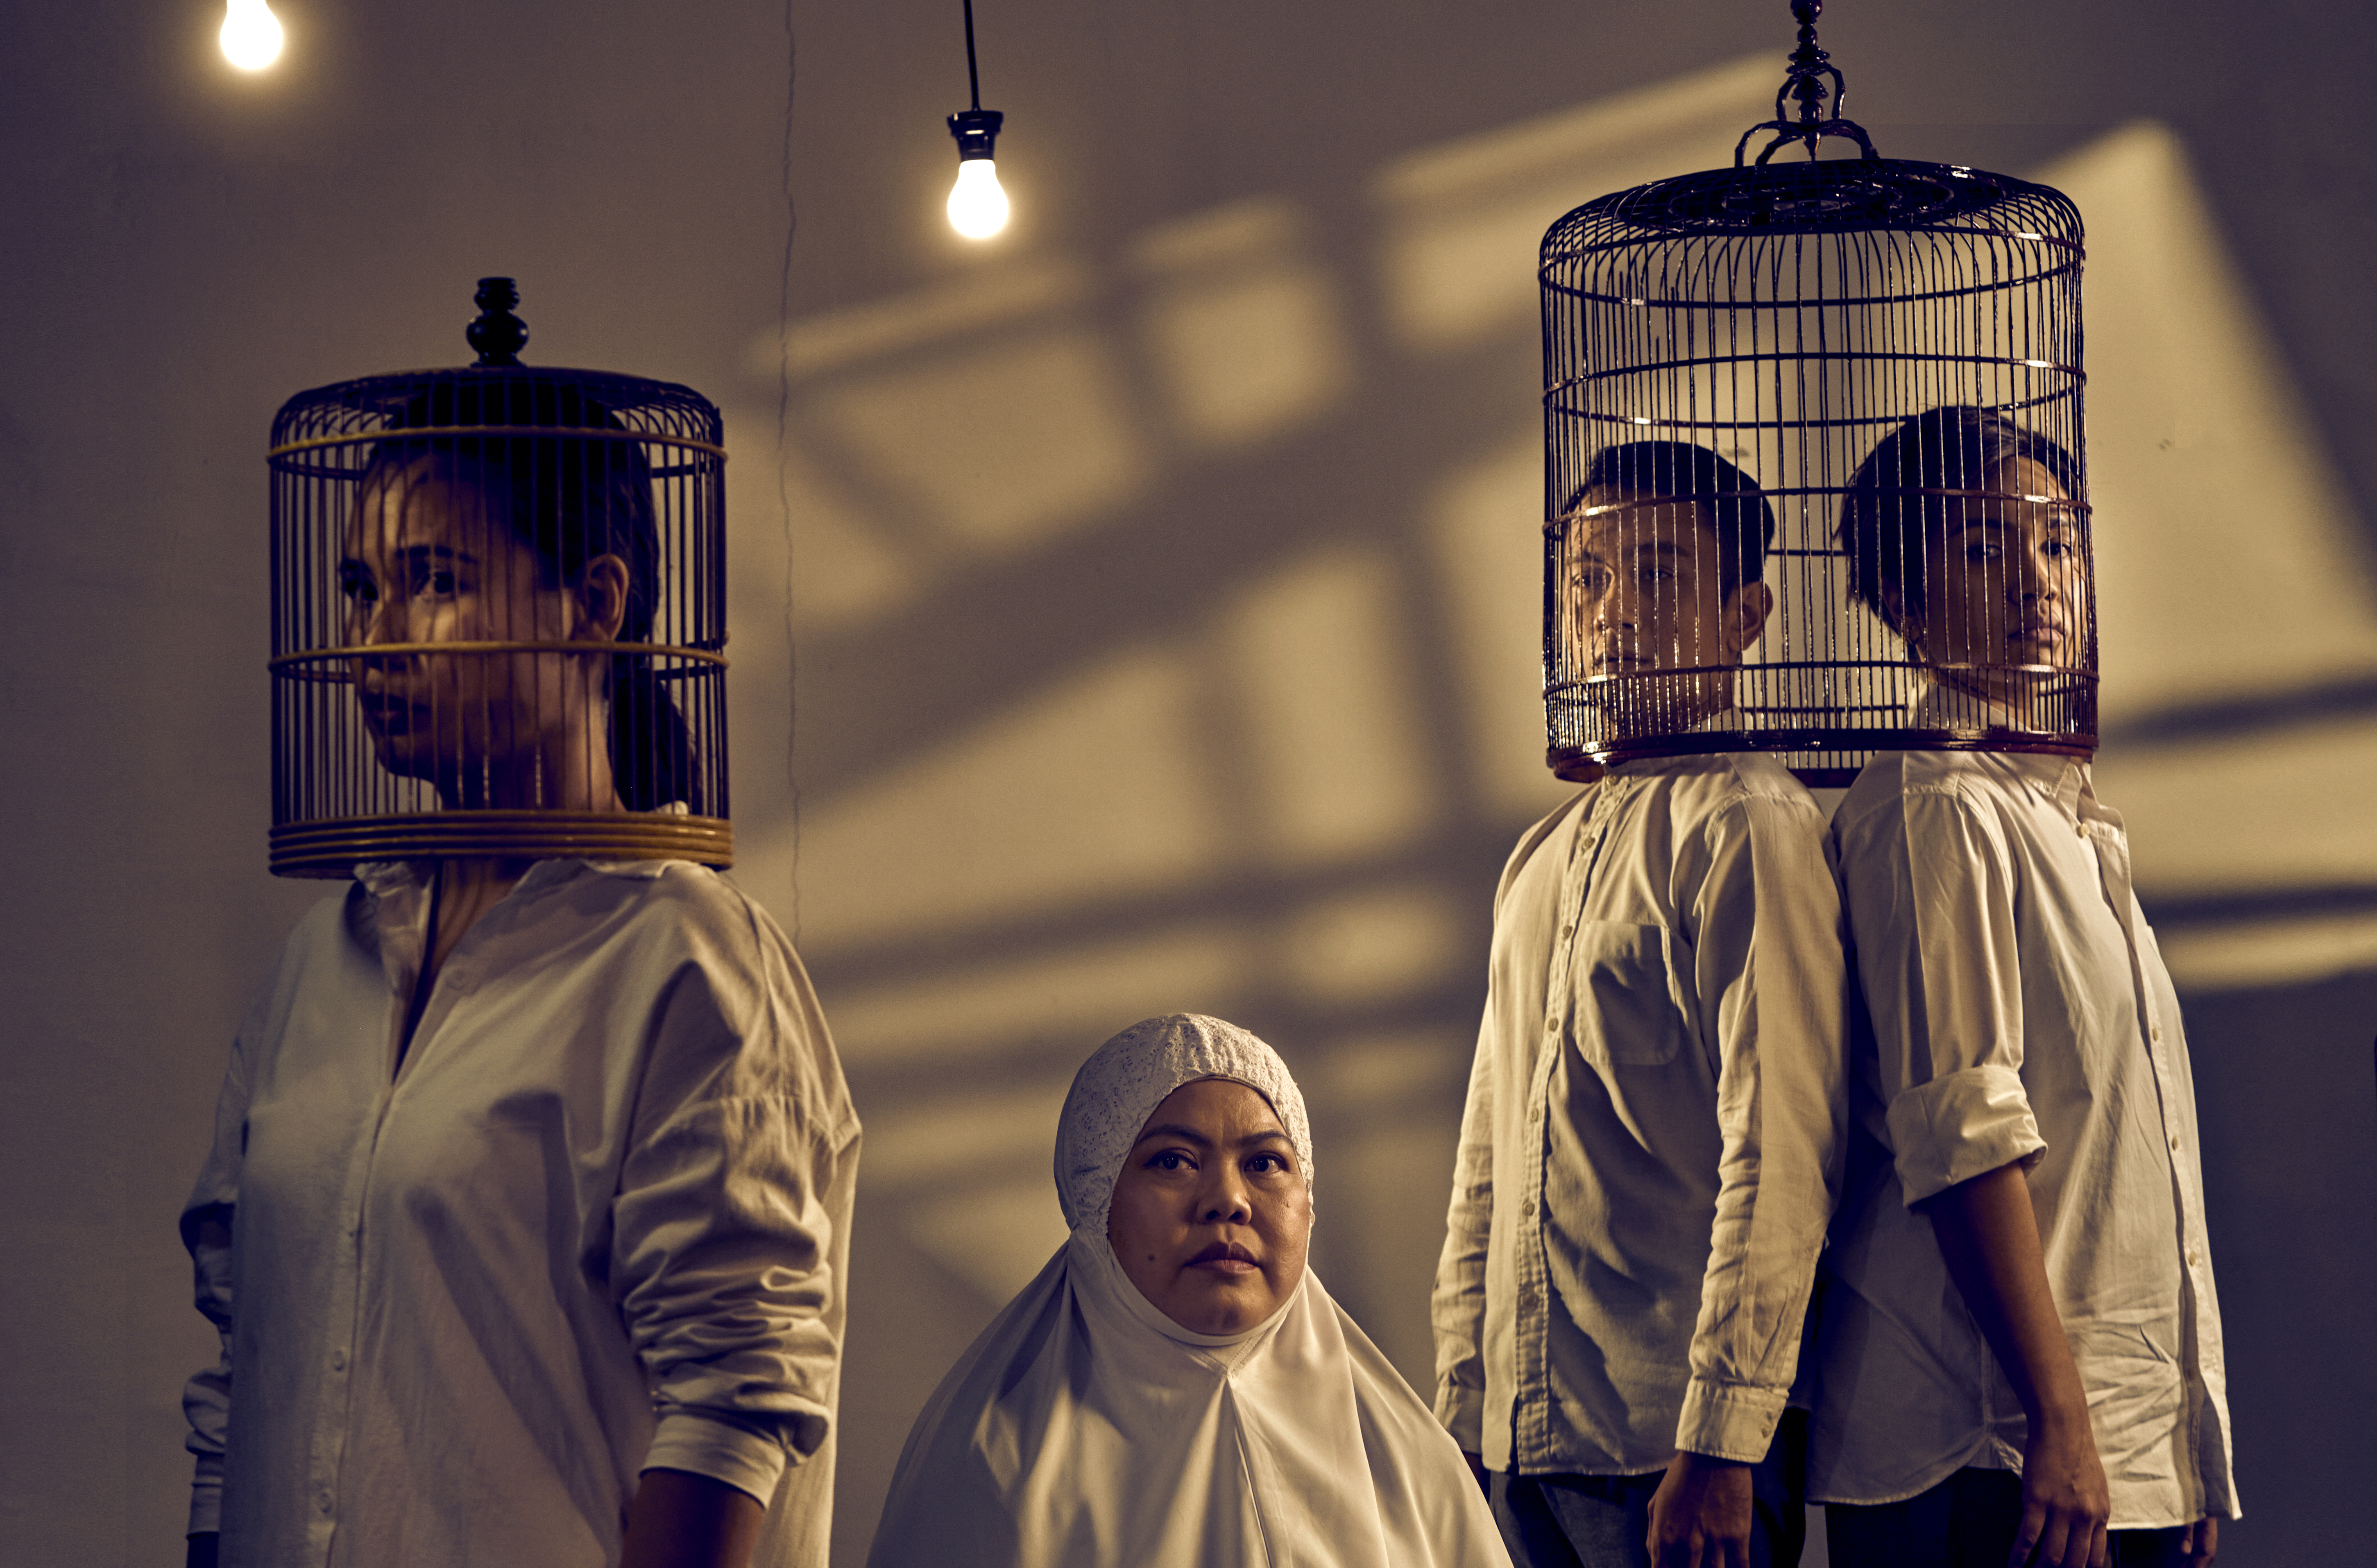 Three persons wearing bird cages over their heads, and a lady in a Malay prayer garment